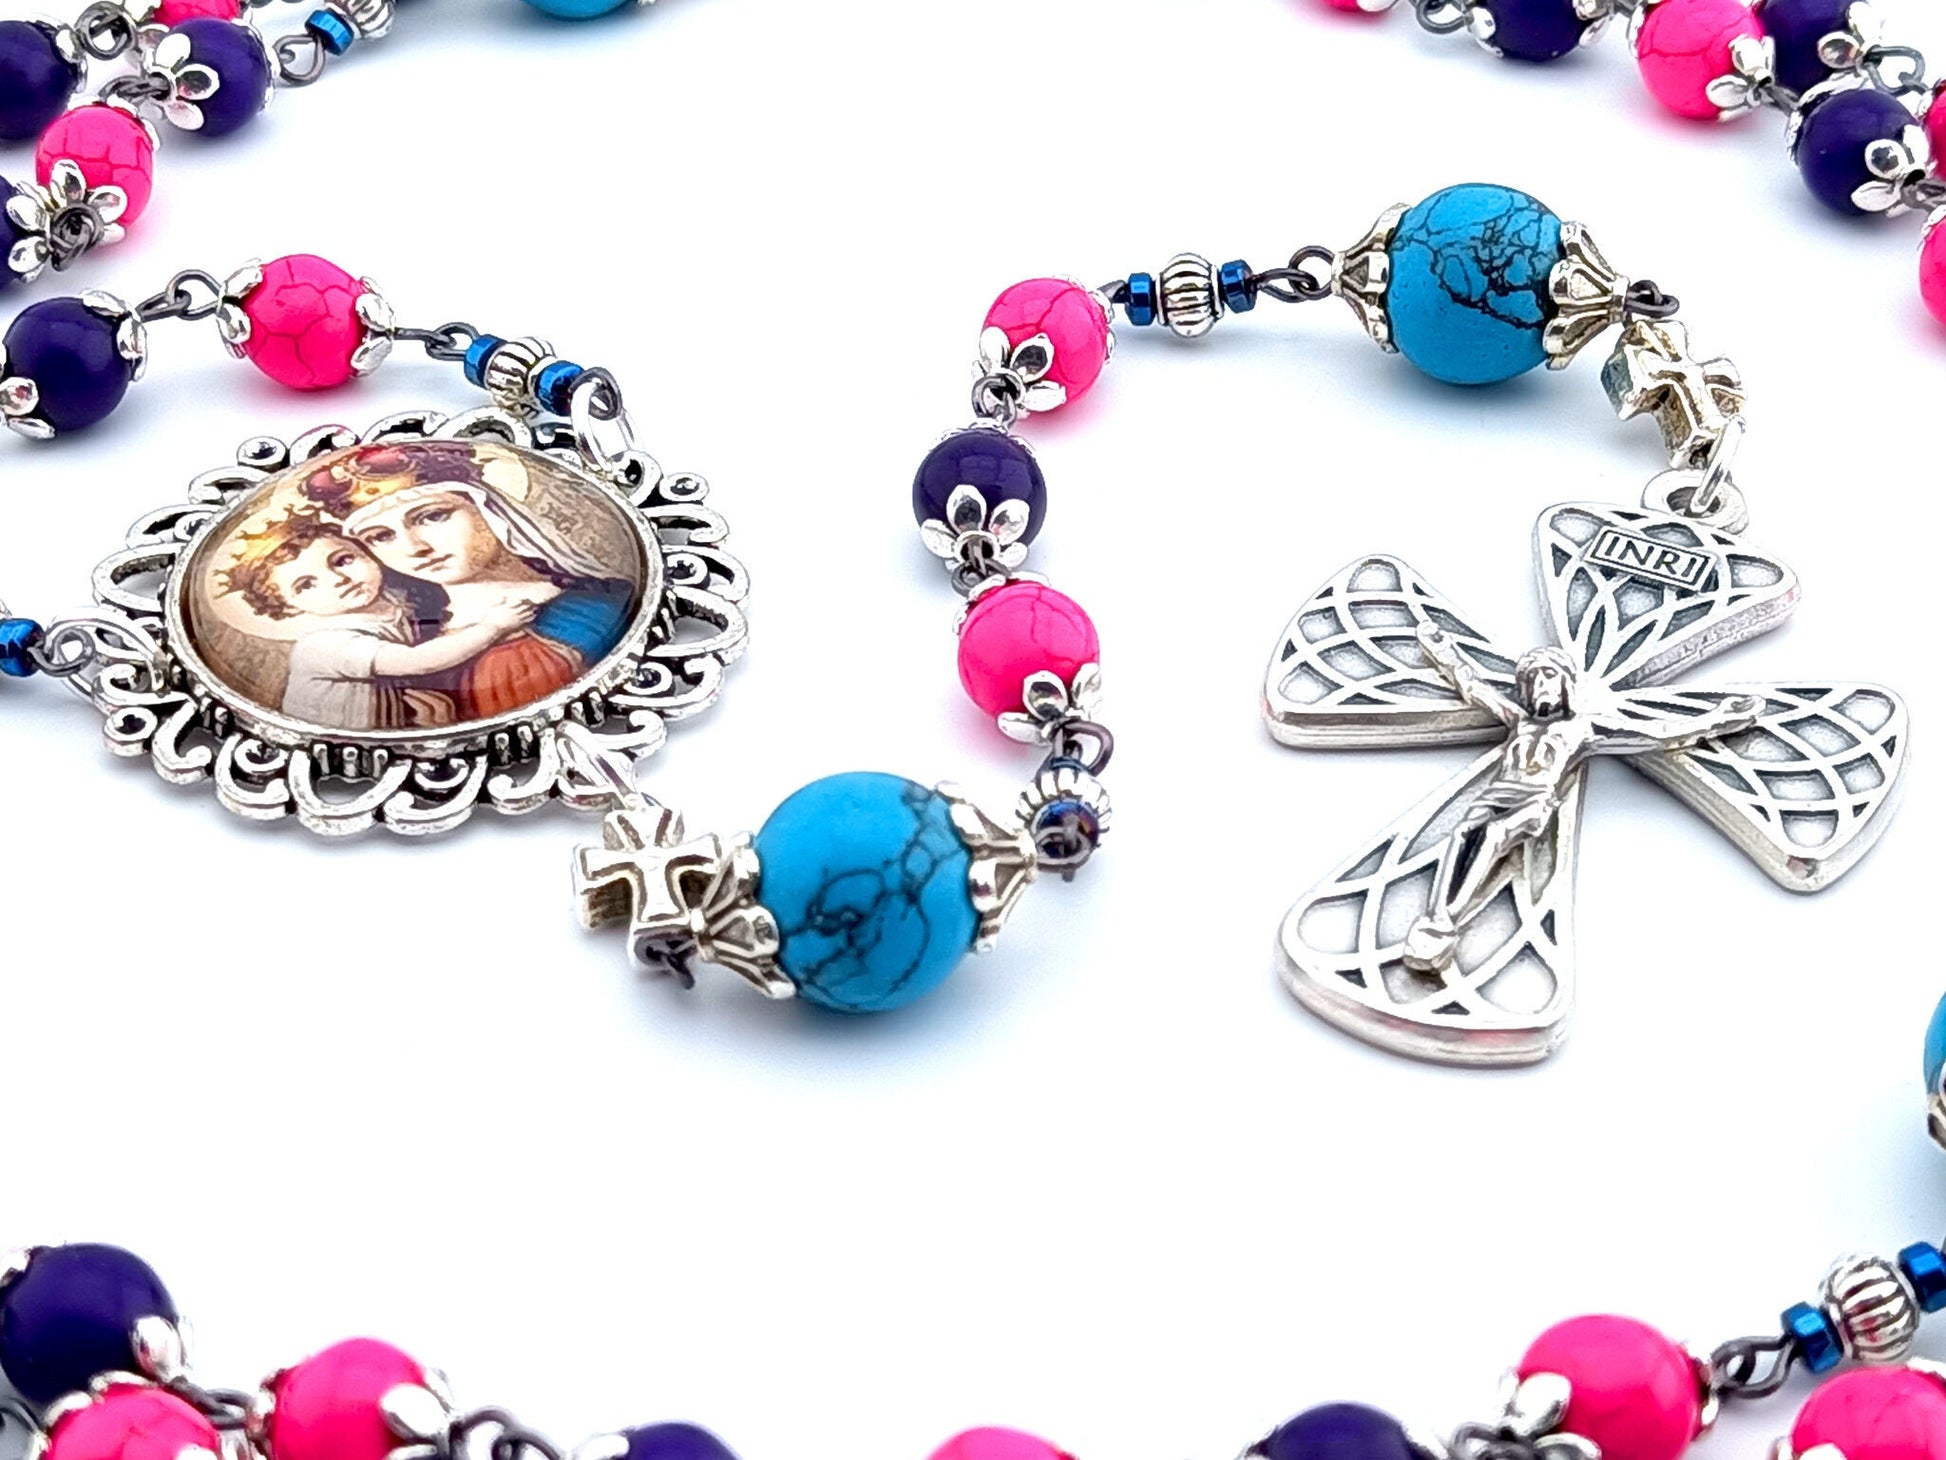 Our Lady Queen of Heaven unique rosary beads with multi coloured gemstone beads, turquoise gemstone pater beads, silver picture centre medal and harlequin crucifix.